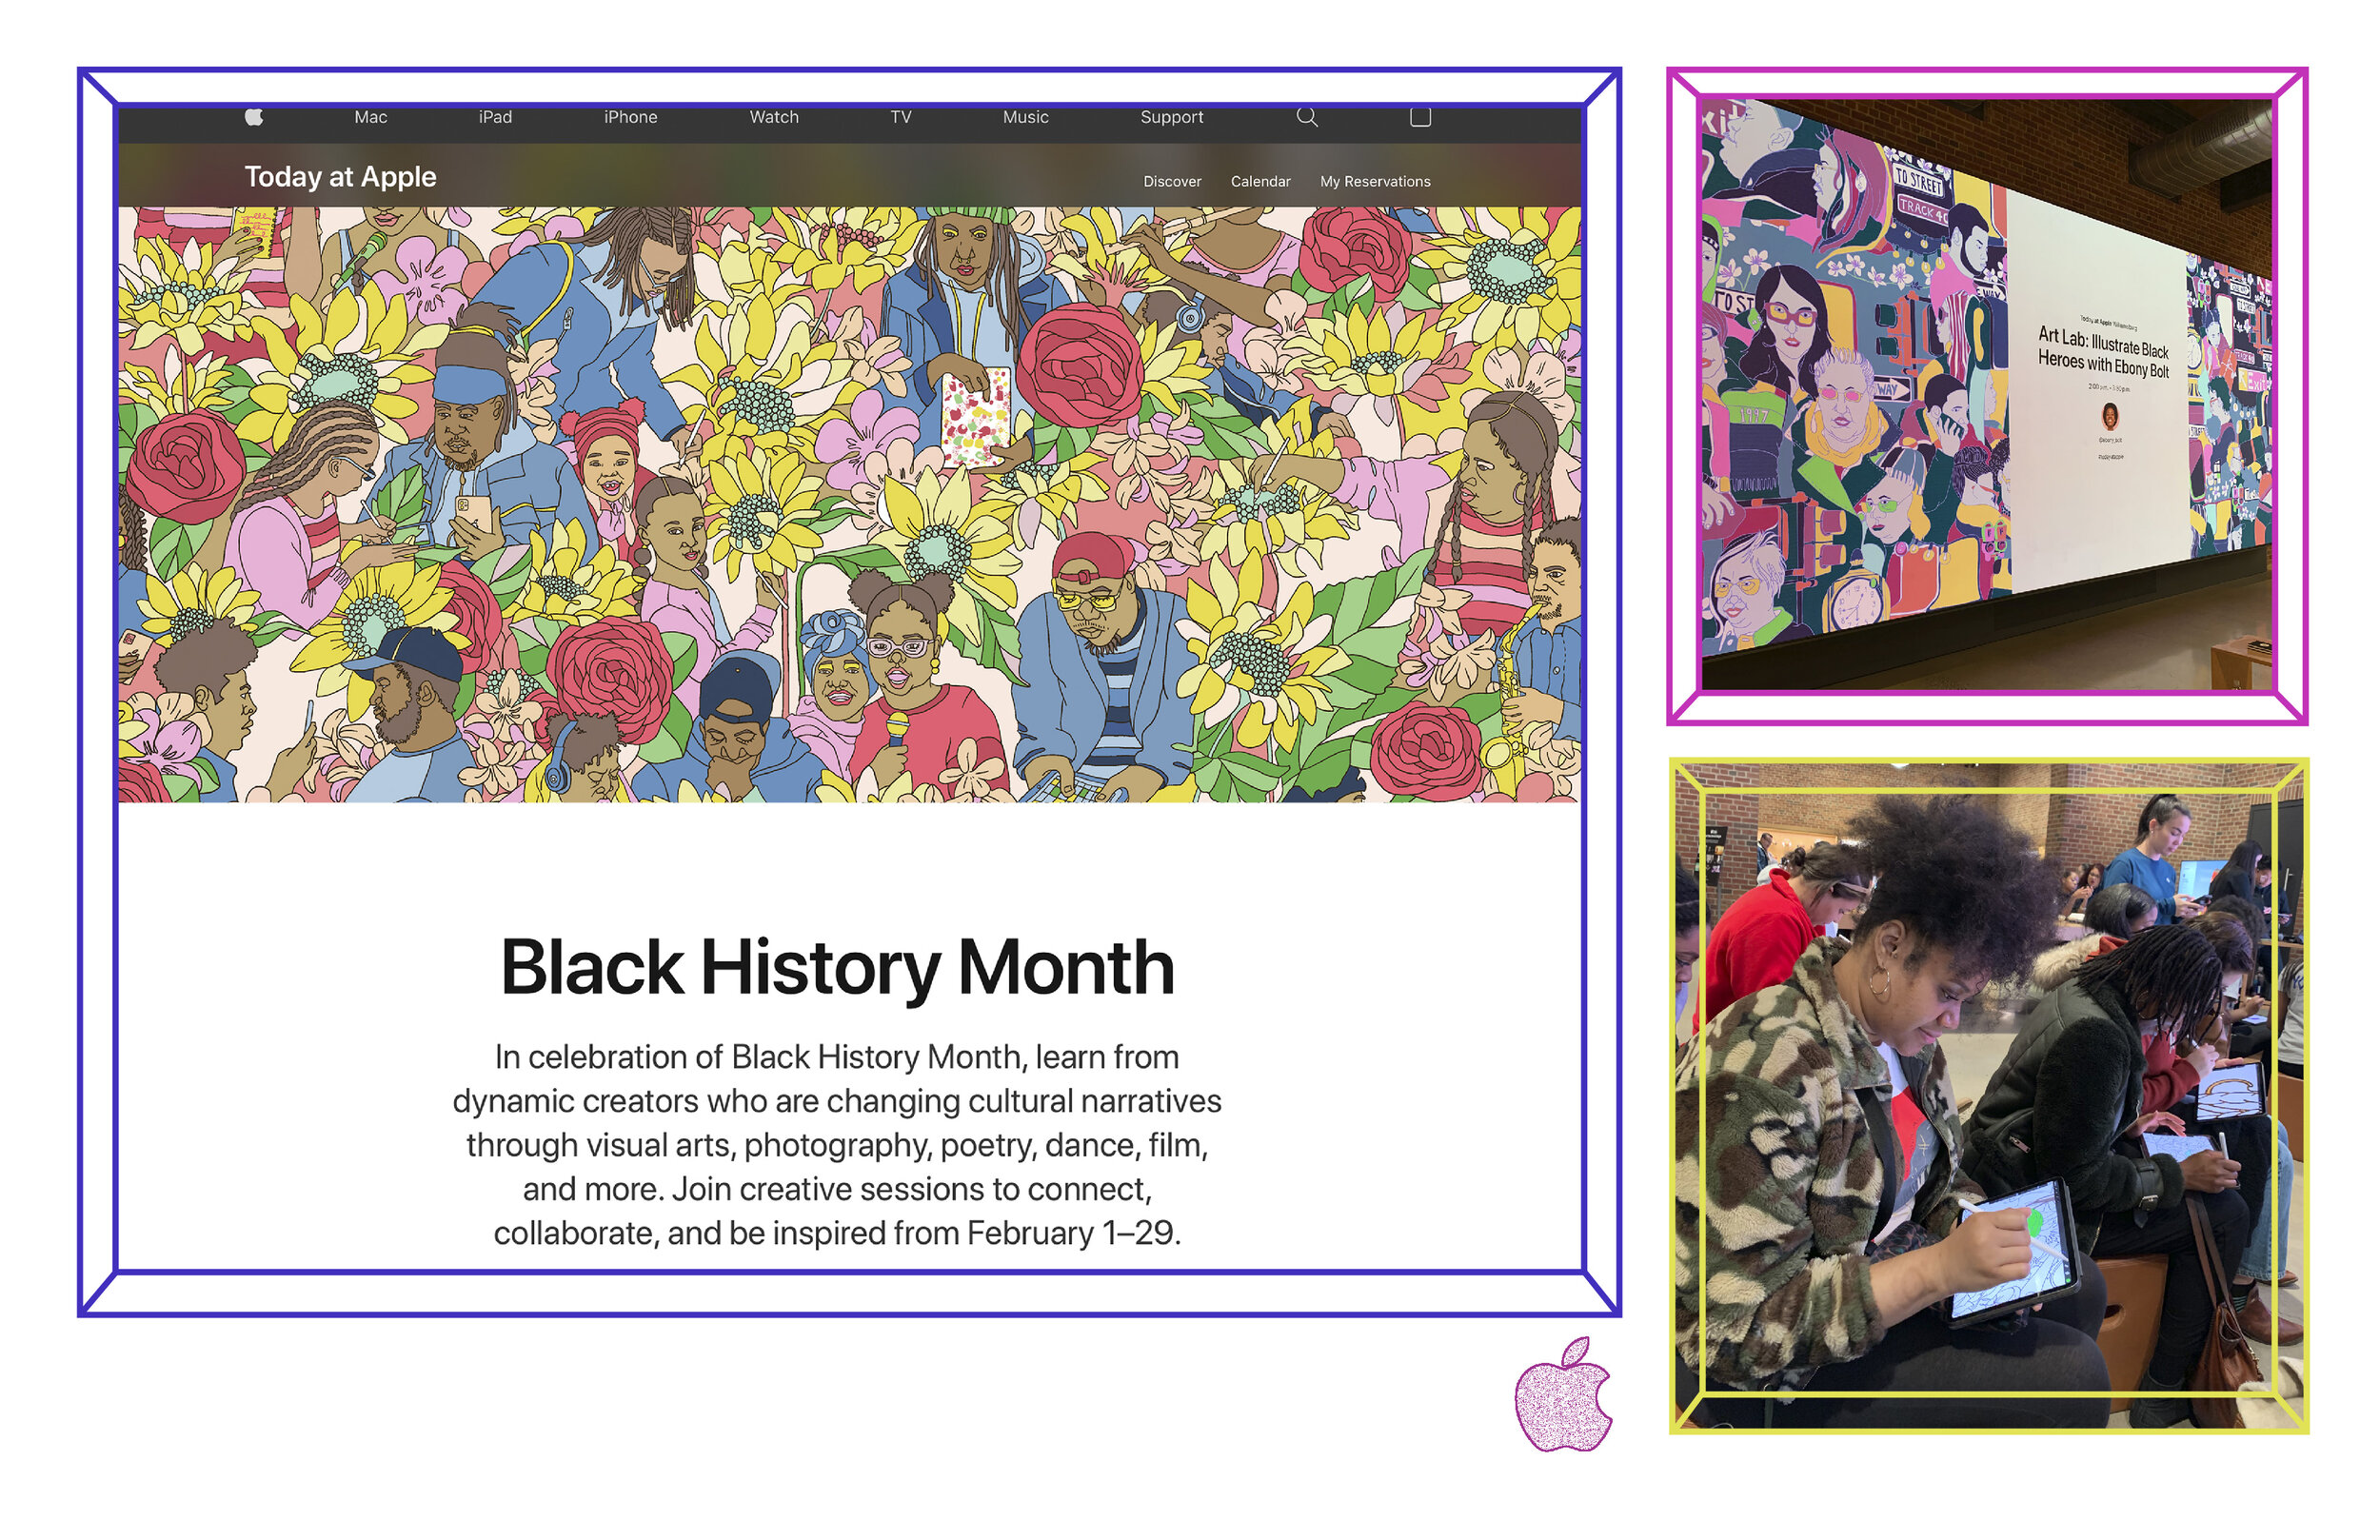  Left Image:   Commissioned illustration,  Creative Connections ,  for 2020 Black History Month programming for Apple.com Right Images:  Today at Apple &nbsp;Coloring Workshop Session in Williamsburg, Brooklyn (Feb. 2020) 